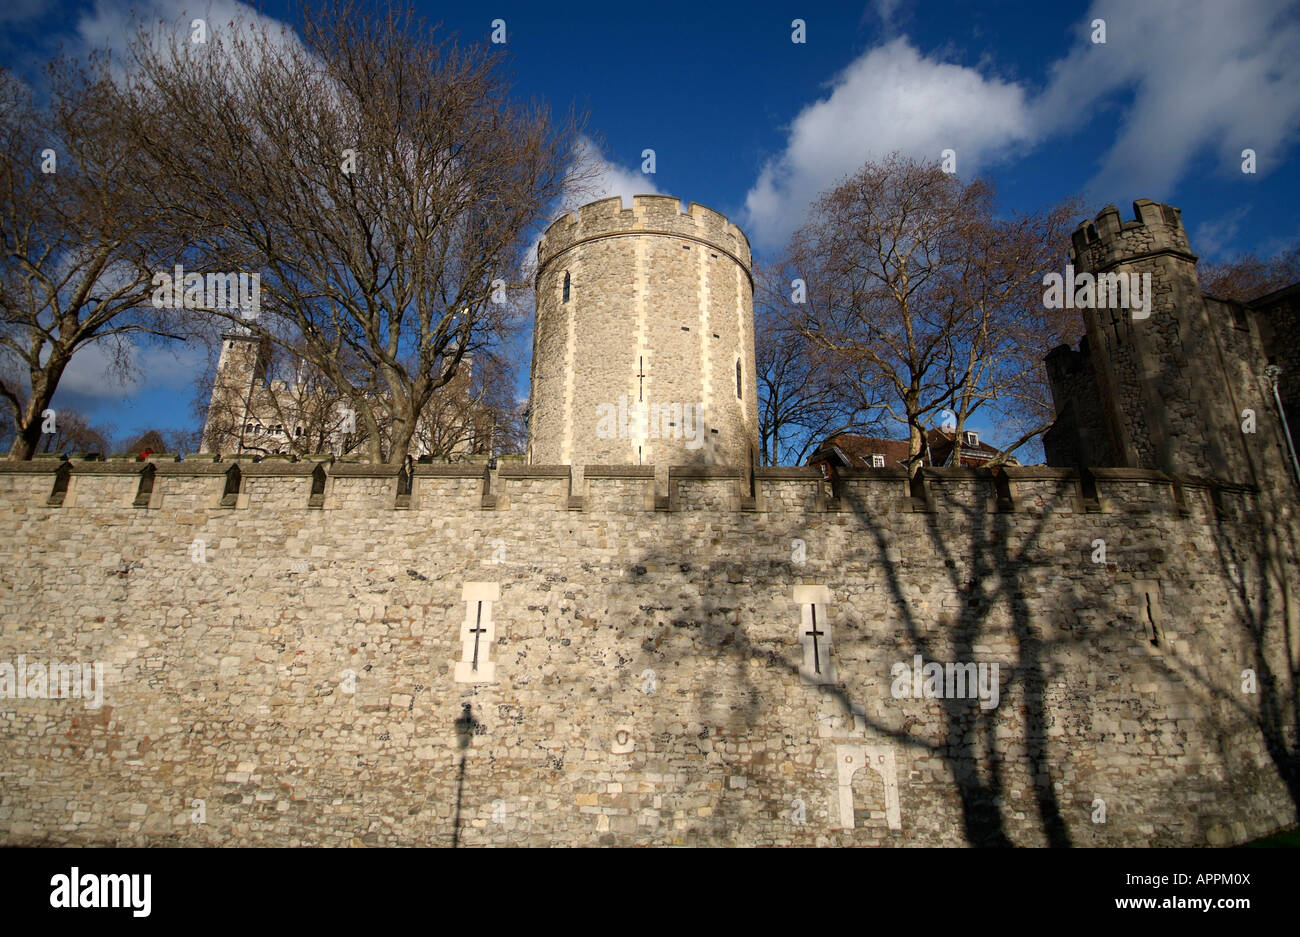 Curtain wall of the Tower of London. Stock Photo